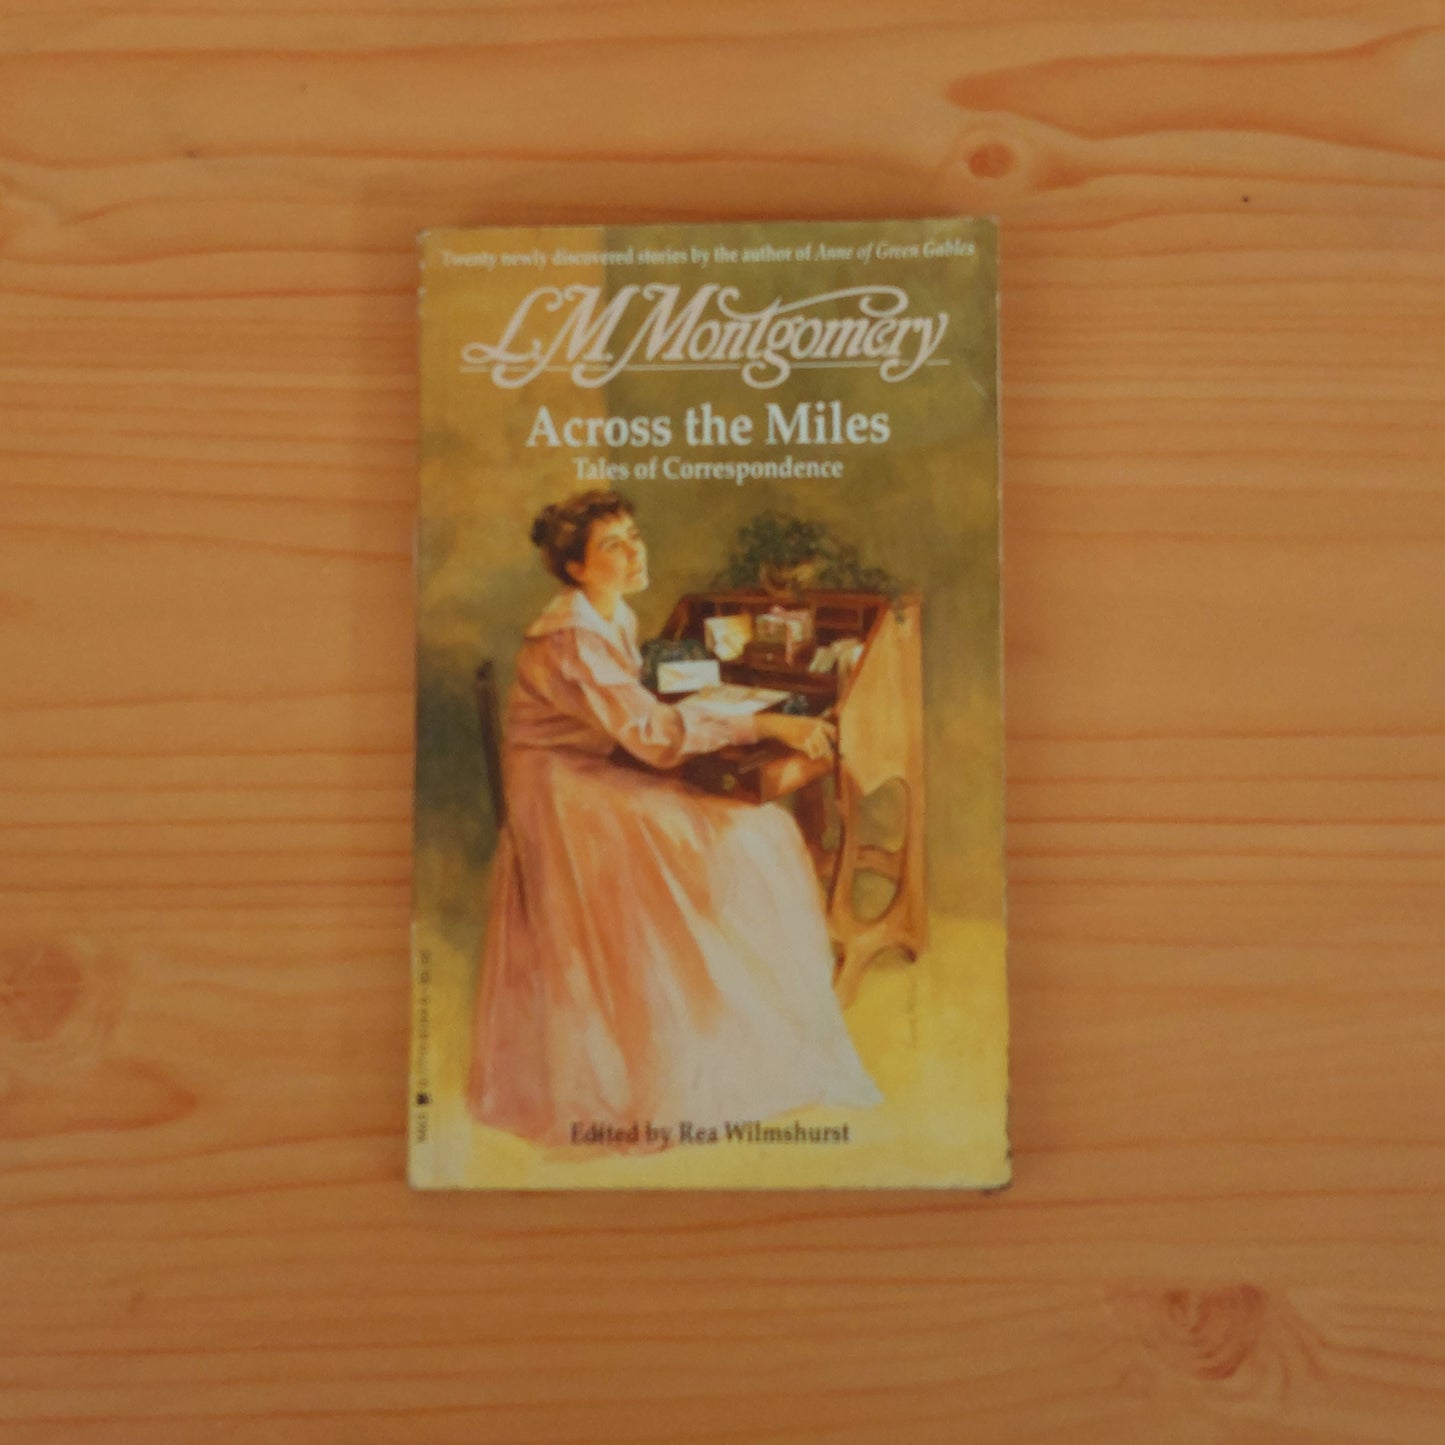 Across the Miles - Tales of Correspondence by L.M. Montgomery